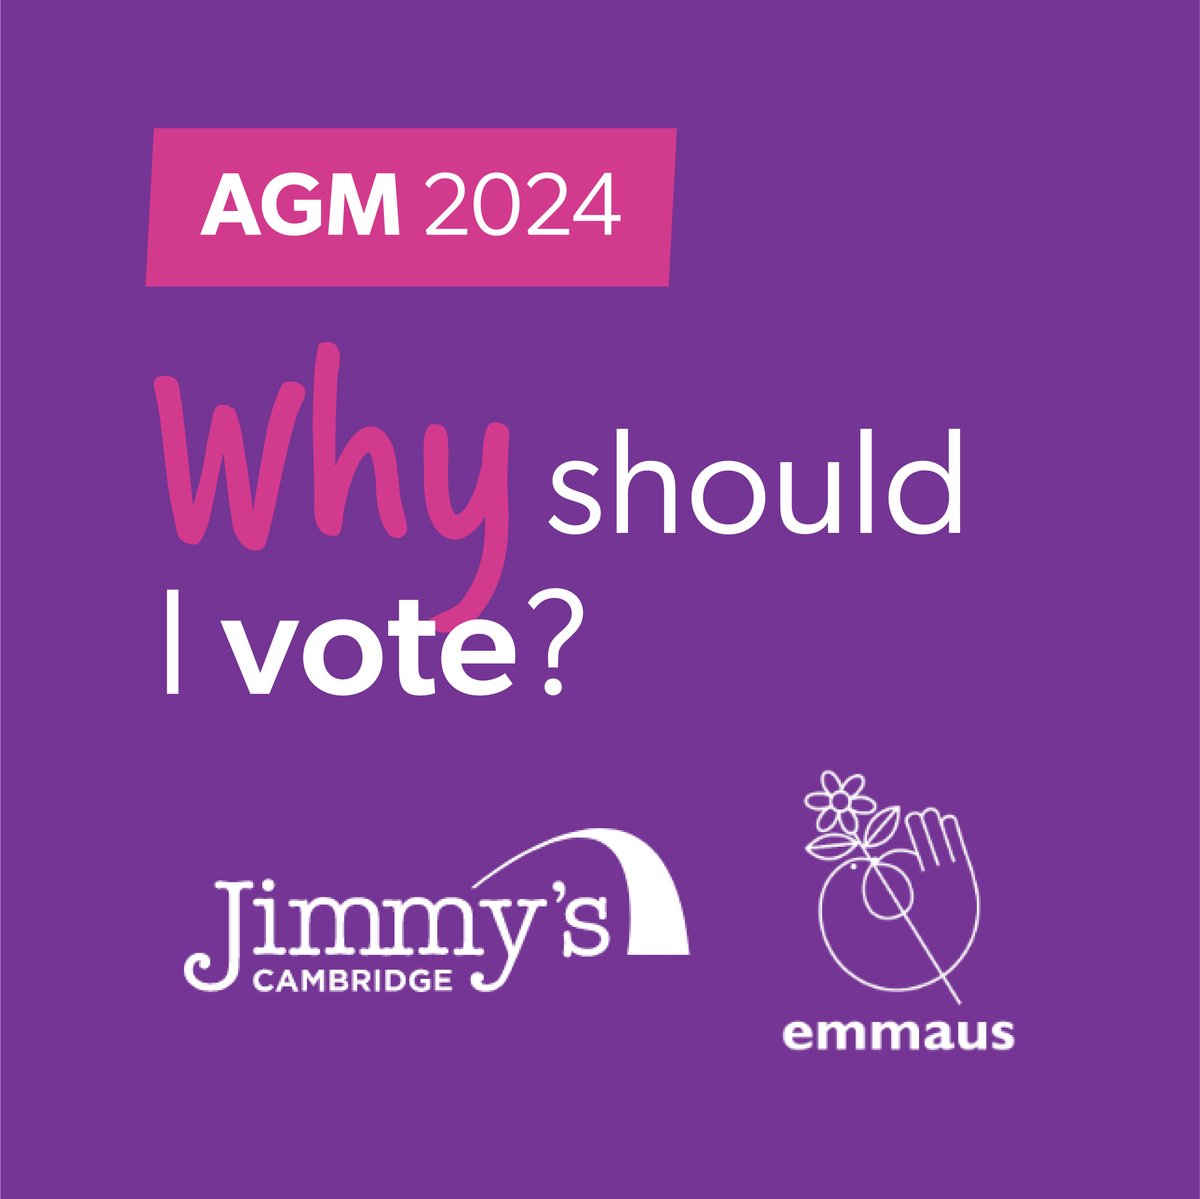 Voting in our AGM allows you to have your say in the future of your building society, and is an opportunity to do some good For every vote at our AGM, we will make a donation to @jimmyscambridge and @emmauscambridge, who help those most in need: pulse.ly/gavkyg8cip